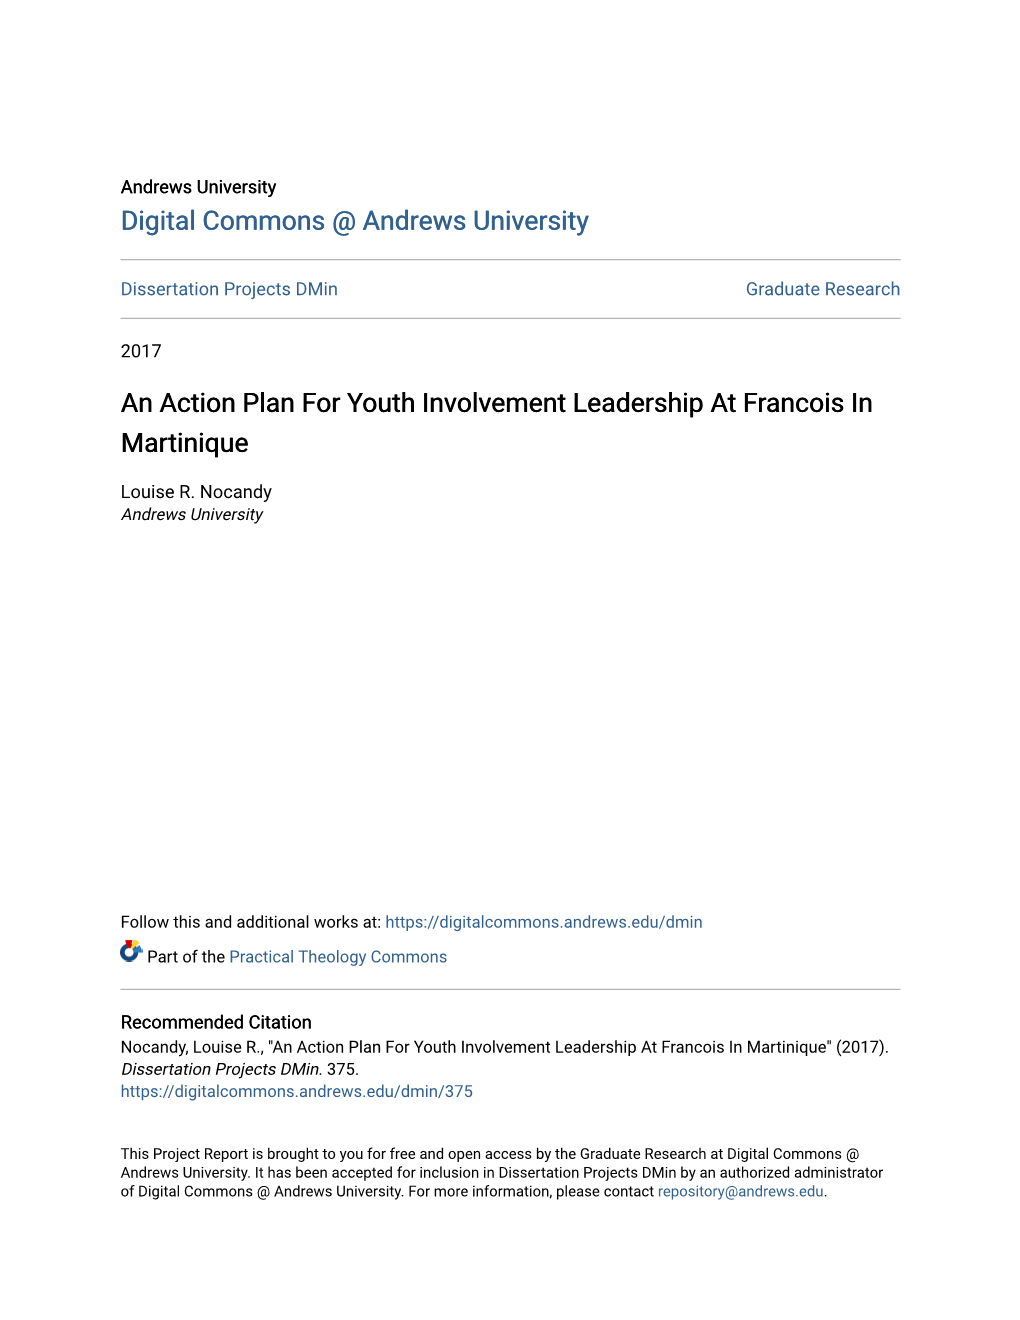 An Action Plan for Youth Involvement Leadership at Francois in Martinique